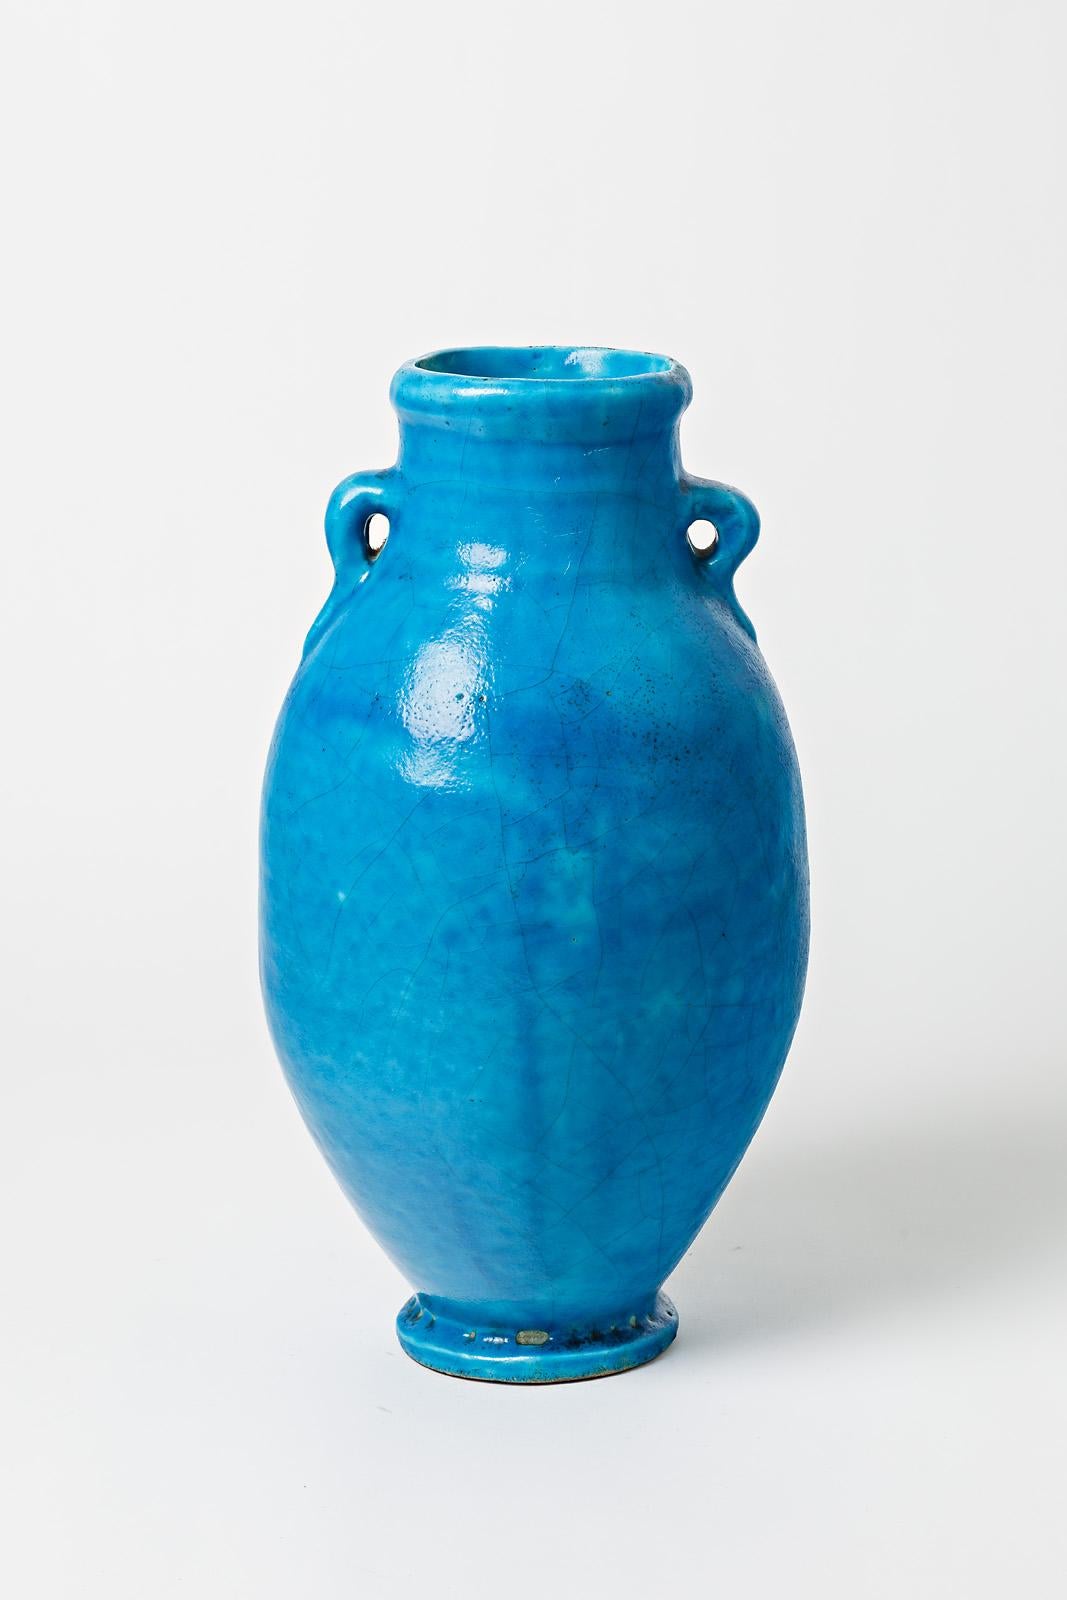 Blue glazed ceramic vase attributed to Raoul Lachenal.
Unsigned. 
Circa 1930.

H : 15.7’ x 7.9’ x 7.9’ inches.